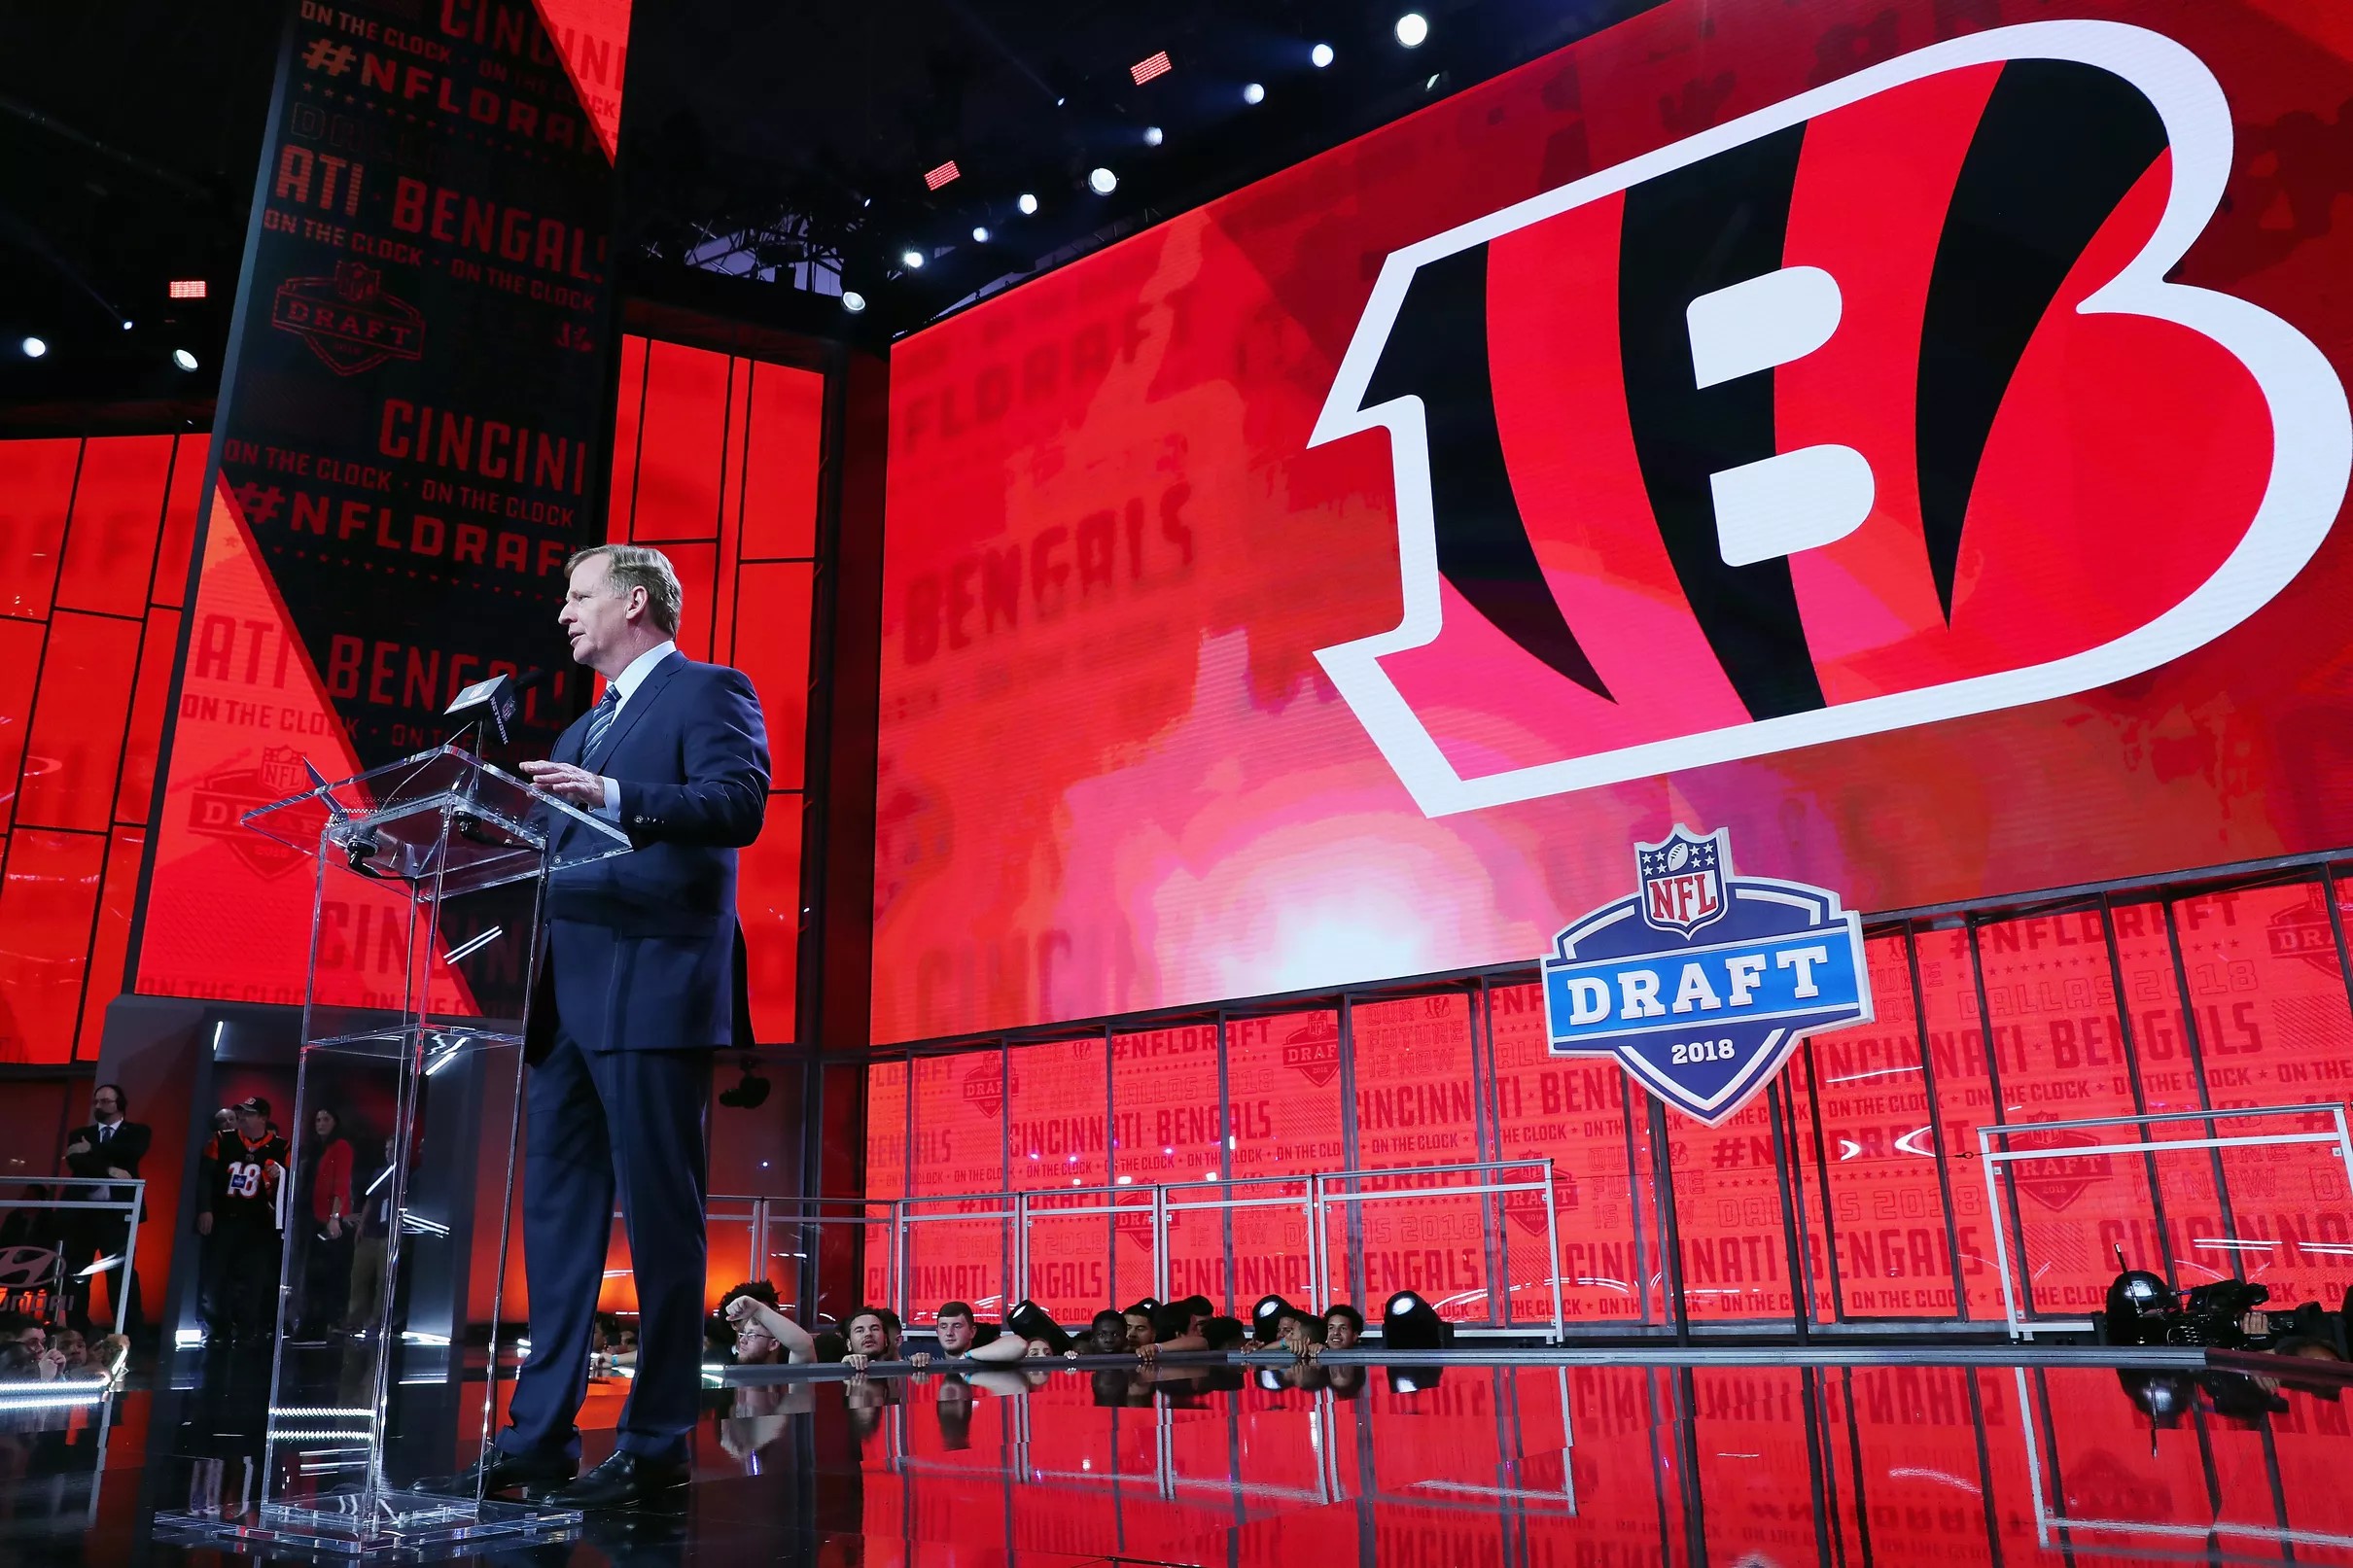 Bengals projected 3 compensatory picks in this year’s NFL Draft